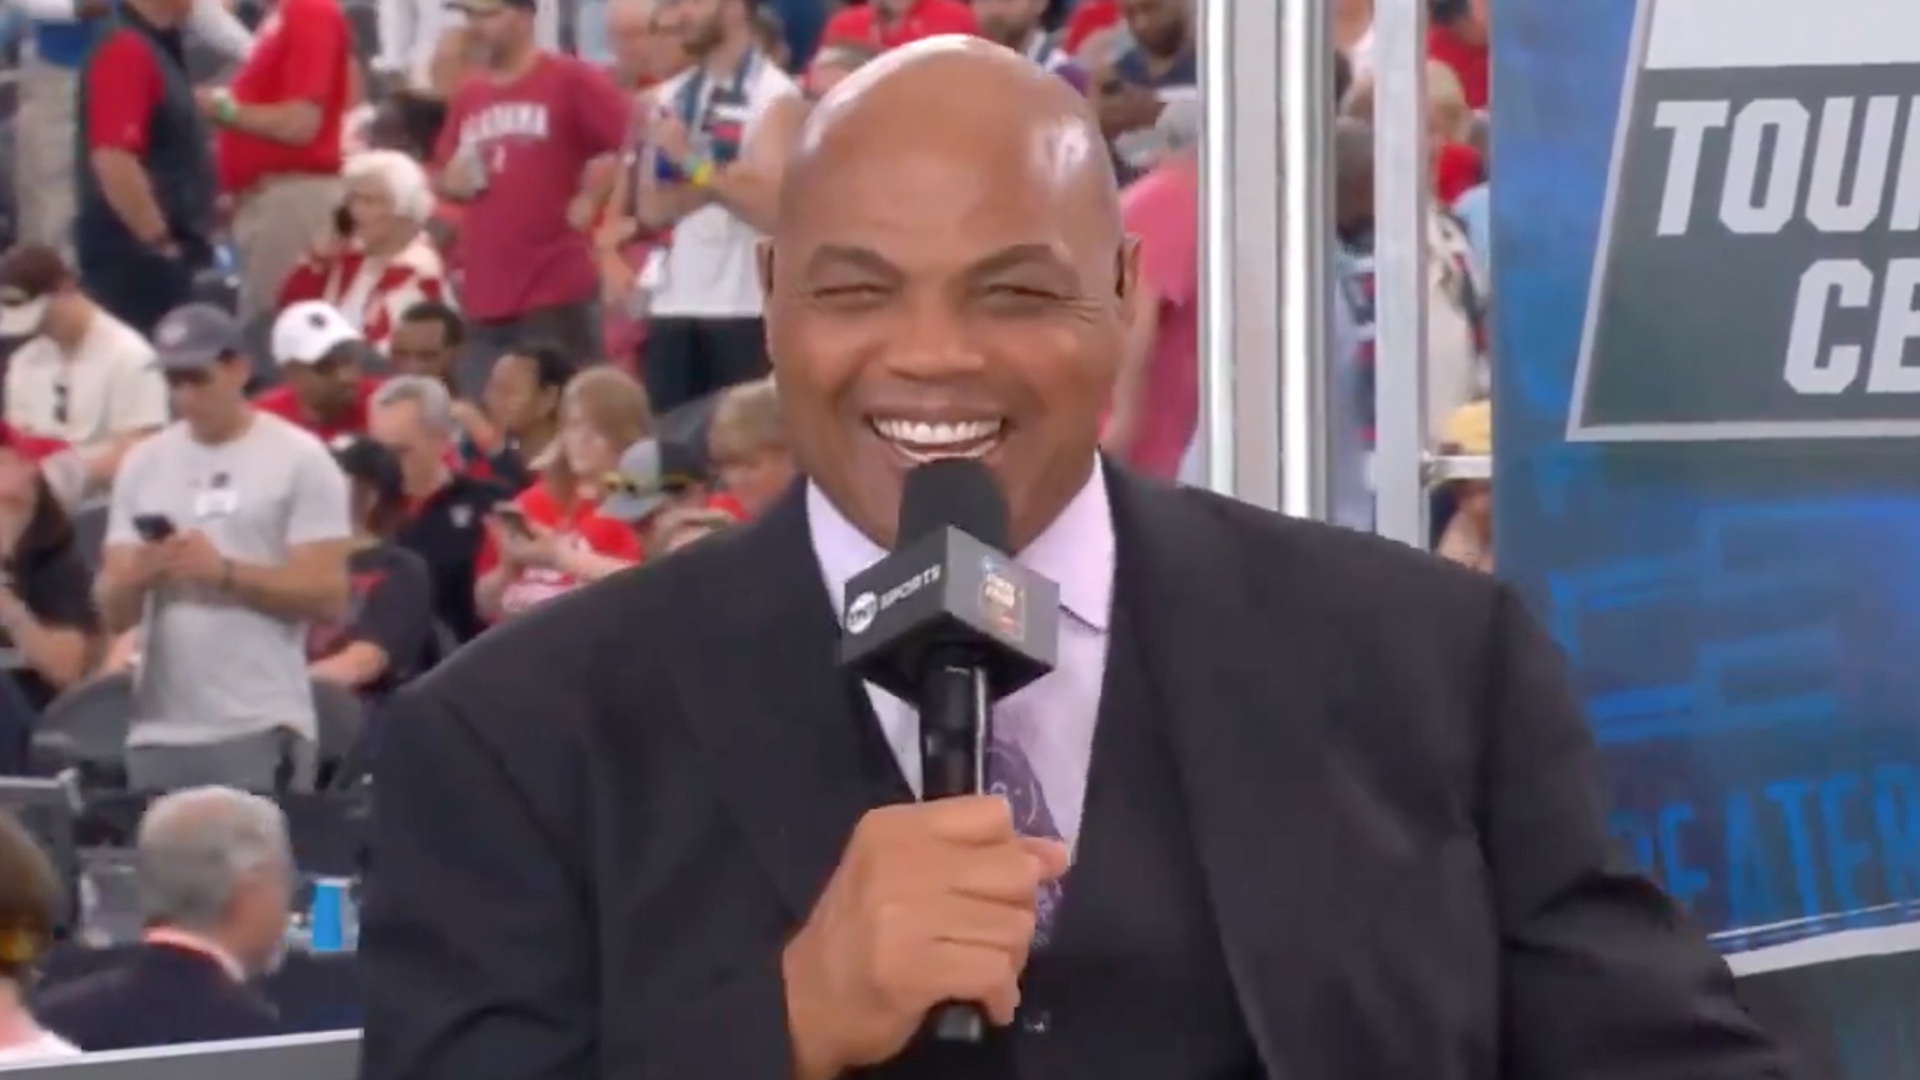 Charles Barkley tells CBS co-stars ‘I hate y’all’ as fans label his helium voice mic ‘one of the greatest segments’ [Video]